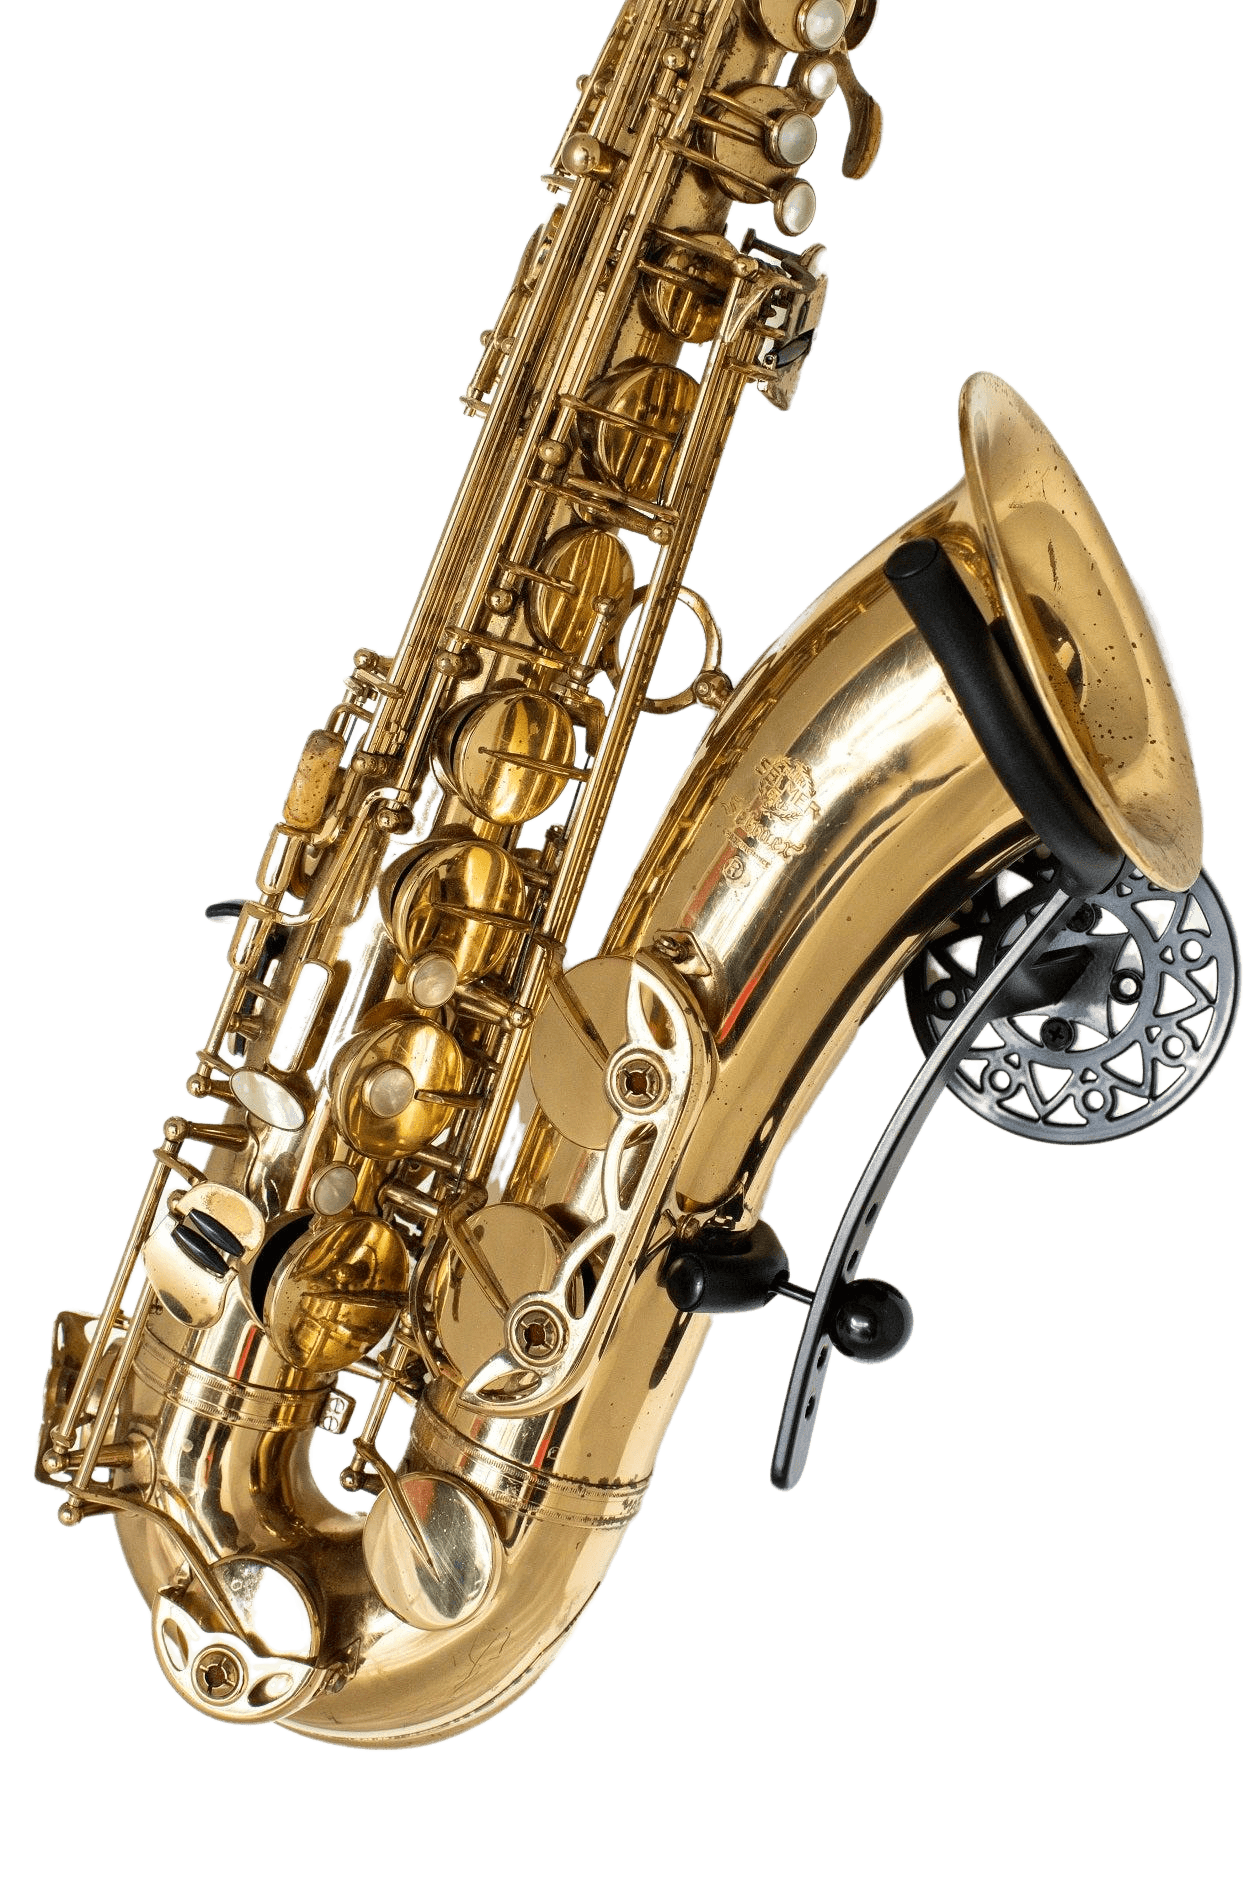 gold finished selmer tenor saxophone in wal-mounted stand Aztec by Locoparasaxo